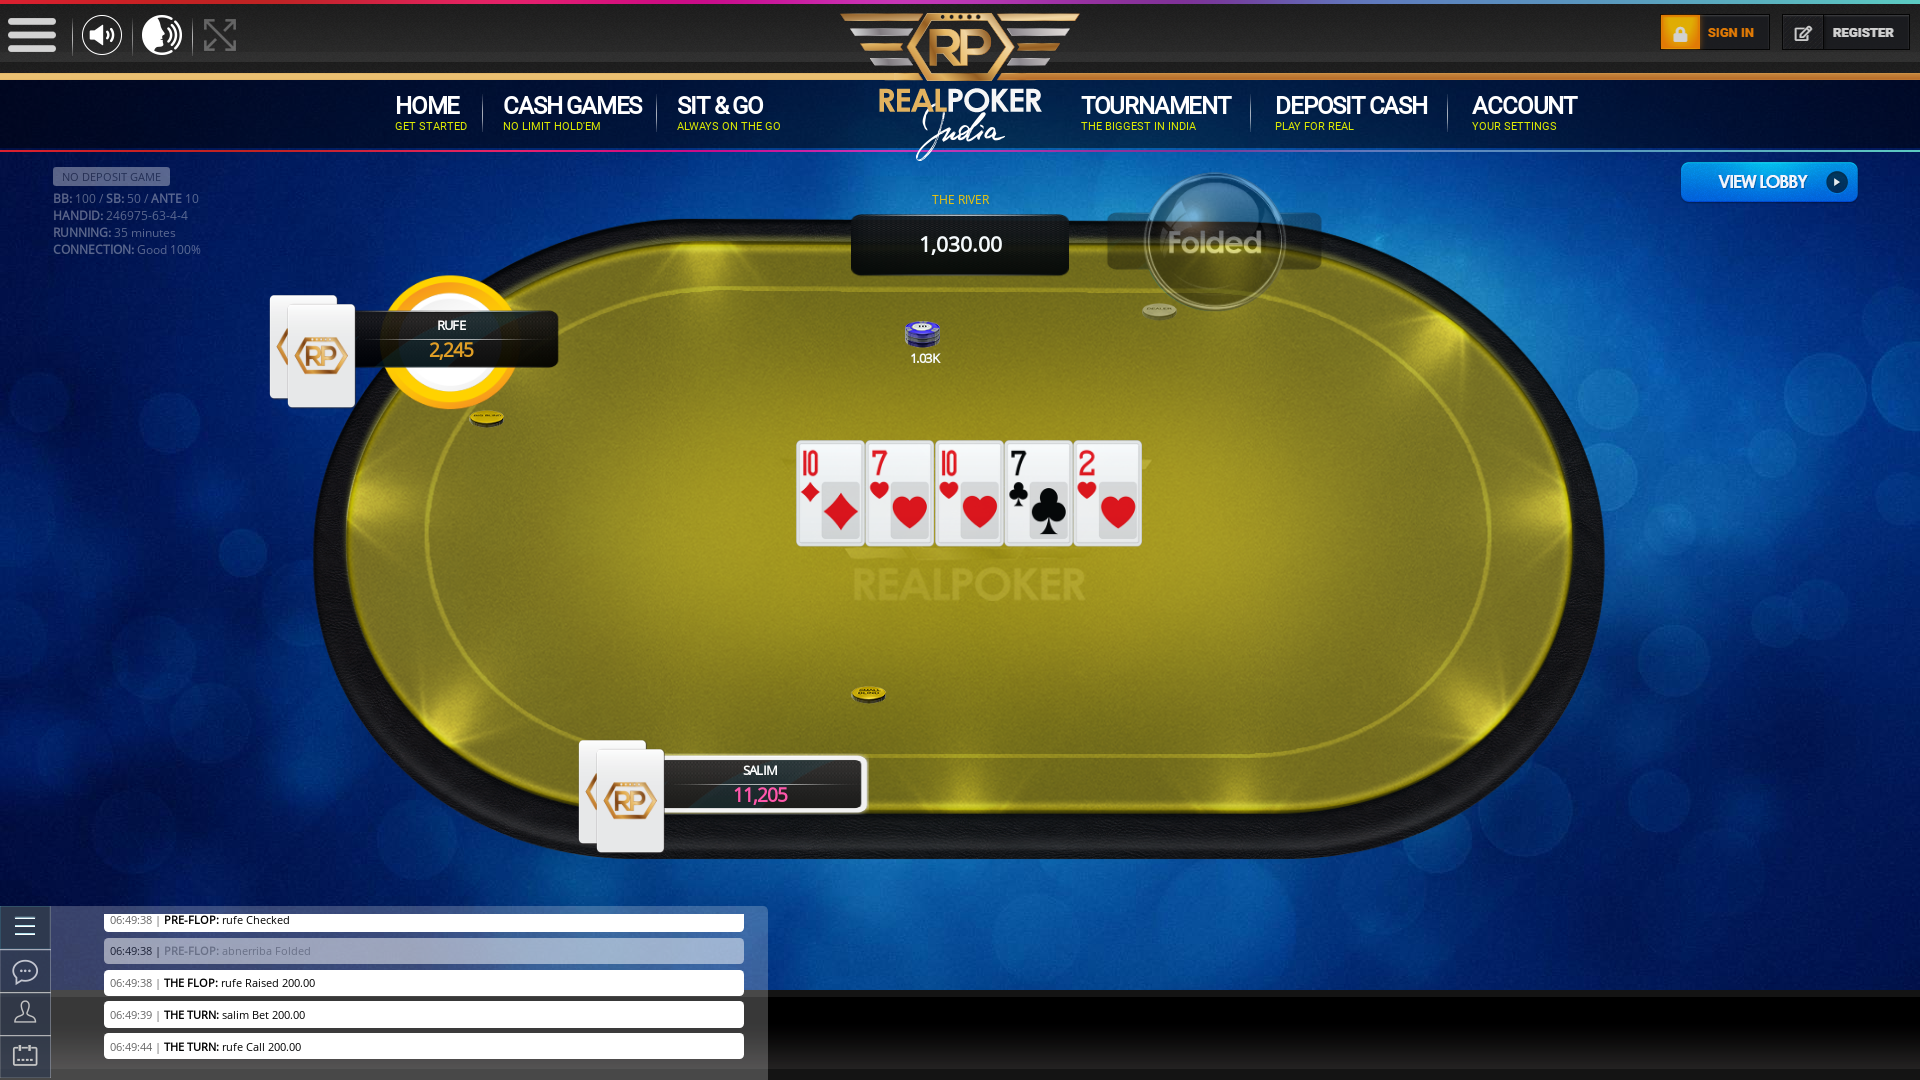 10 player texas holdem table at real poker with the table id 246975